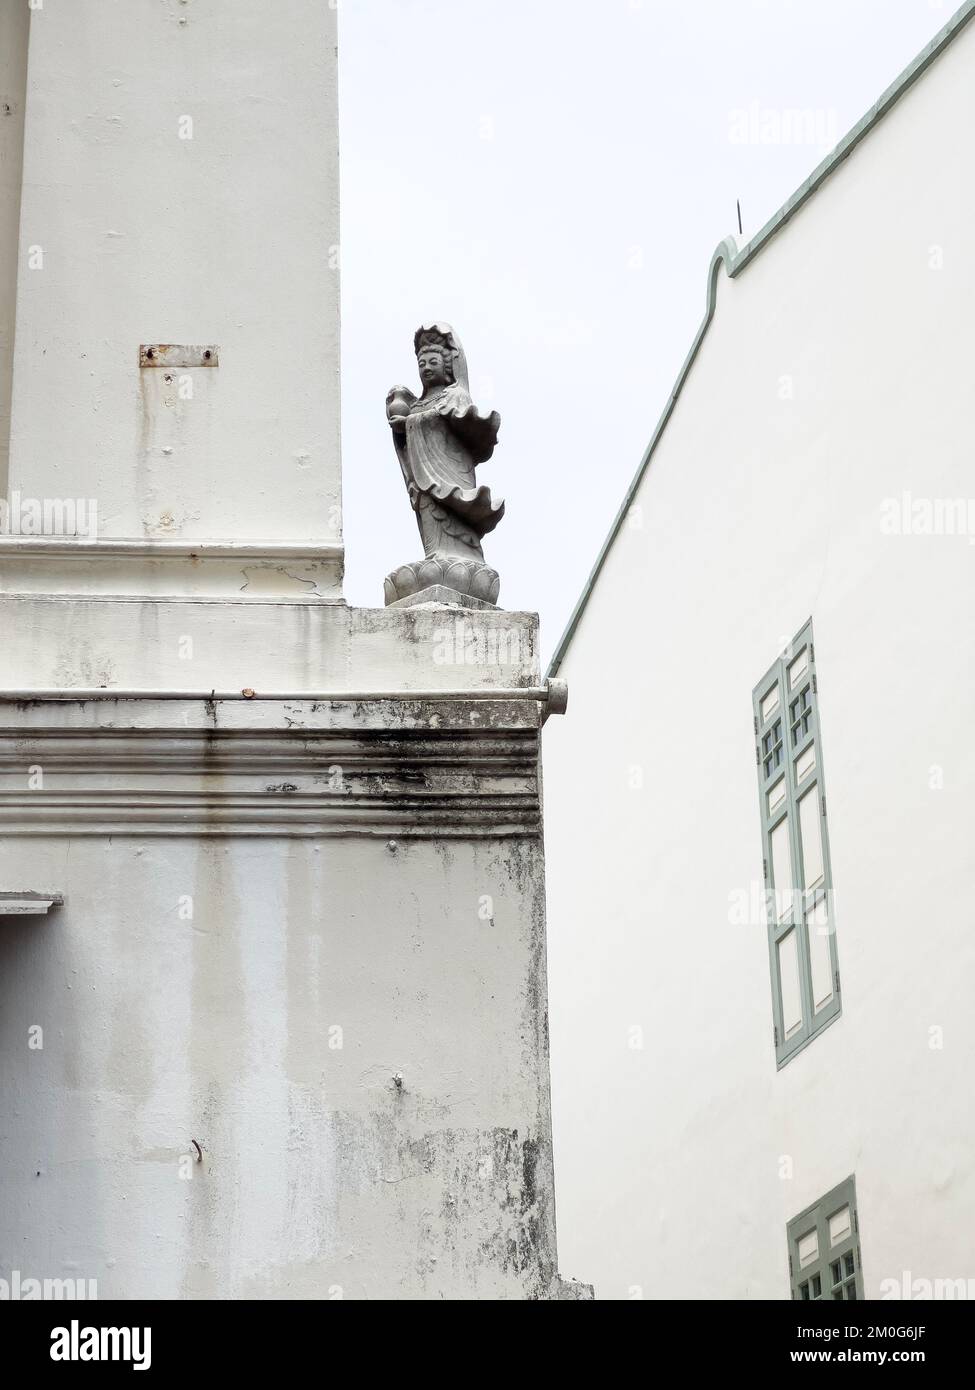 Guangyin or Goodness of Mercy statue placed on a building exterior which is overlooking the street. Stock Photo